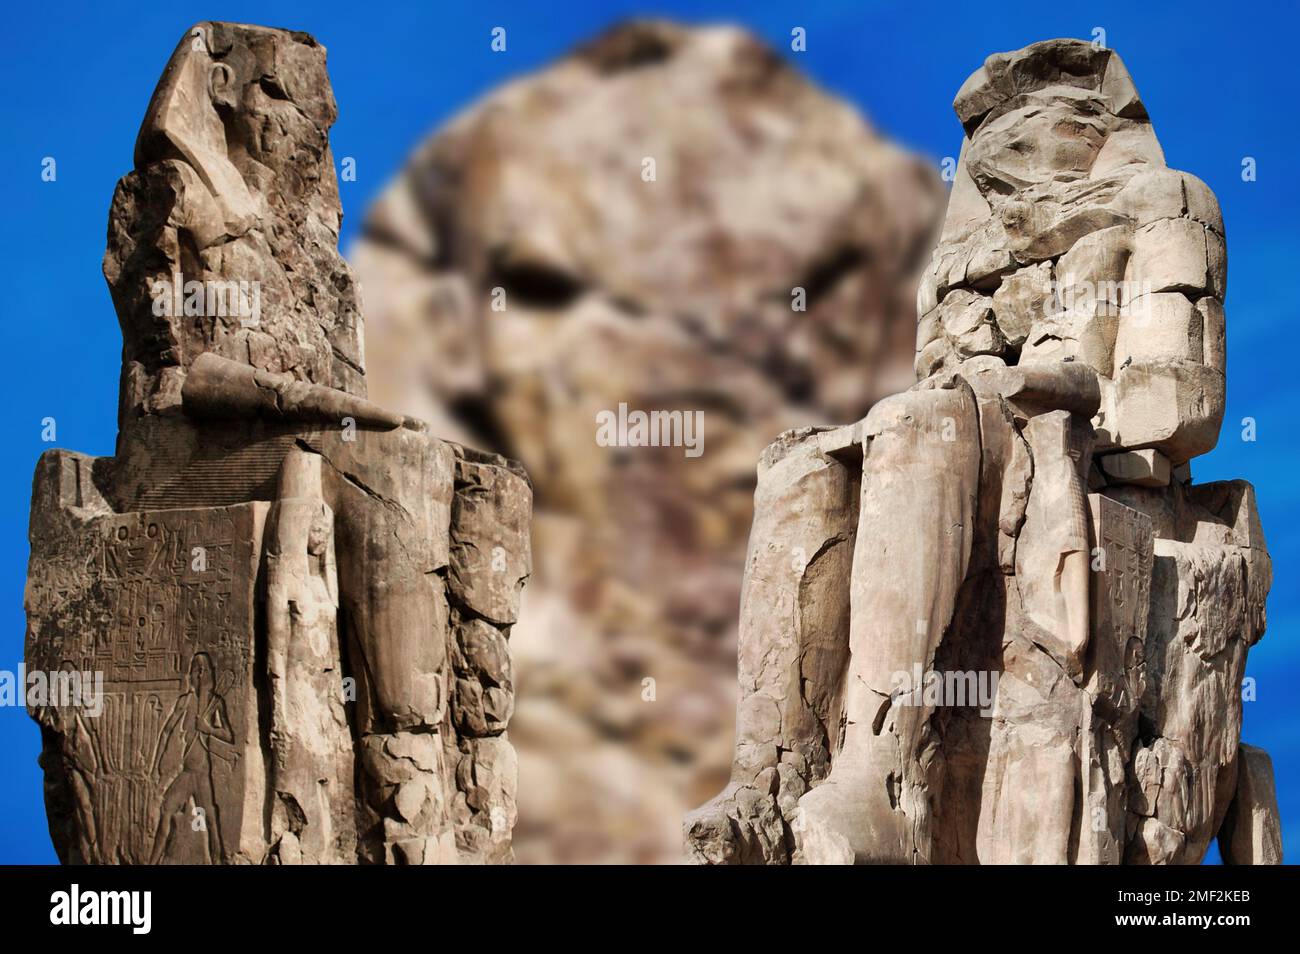 In the city of Luxor there are two huge twin statues, the Colossi of Memnon representing Pharaoh Amenhotep III and are placed in front of his funerary Stock Photo